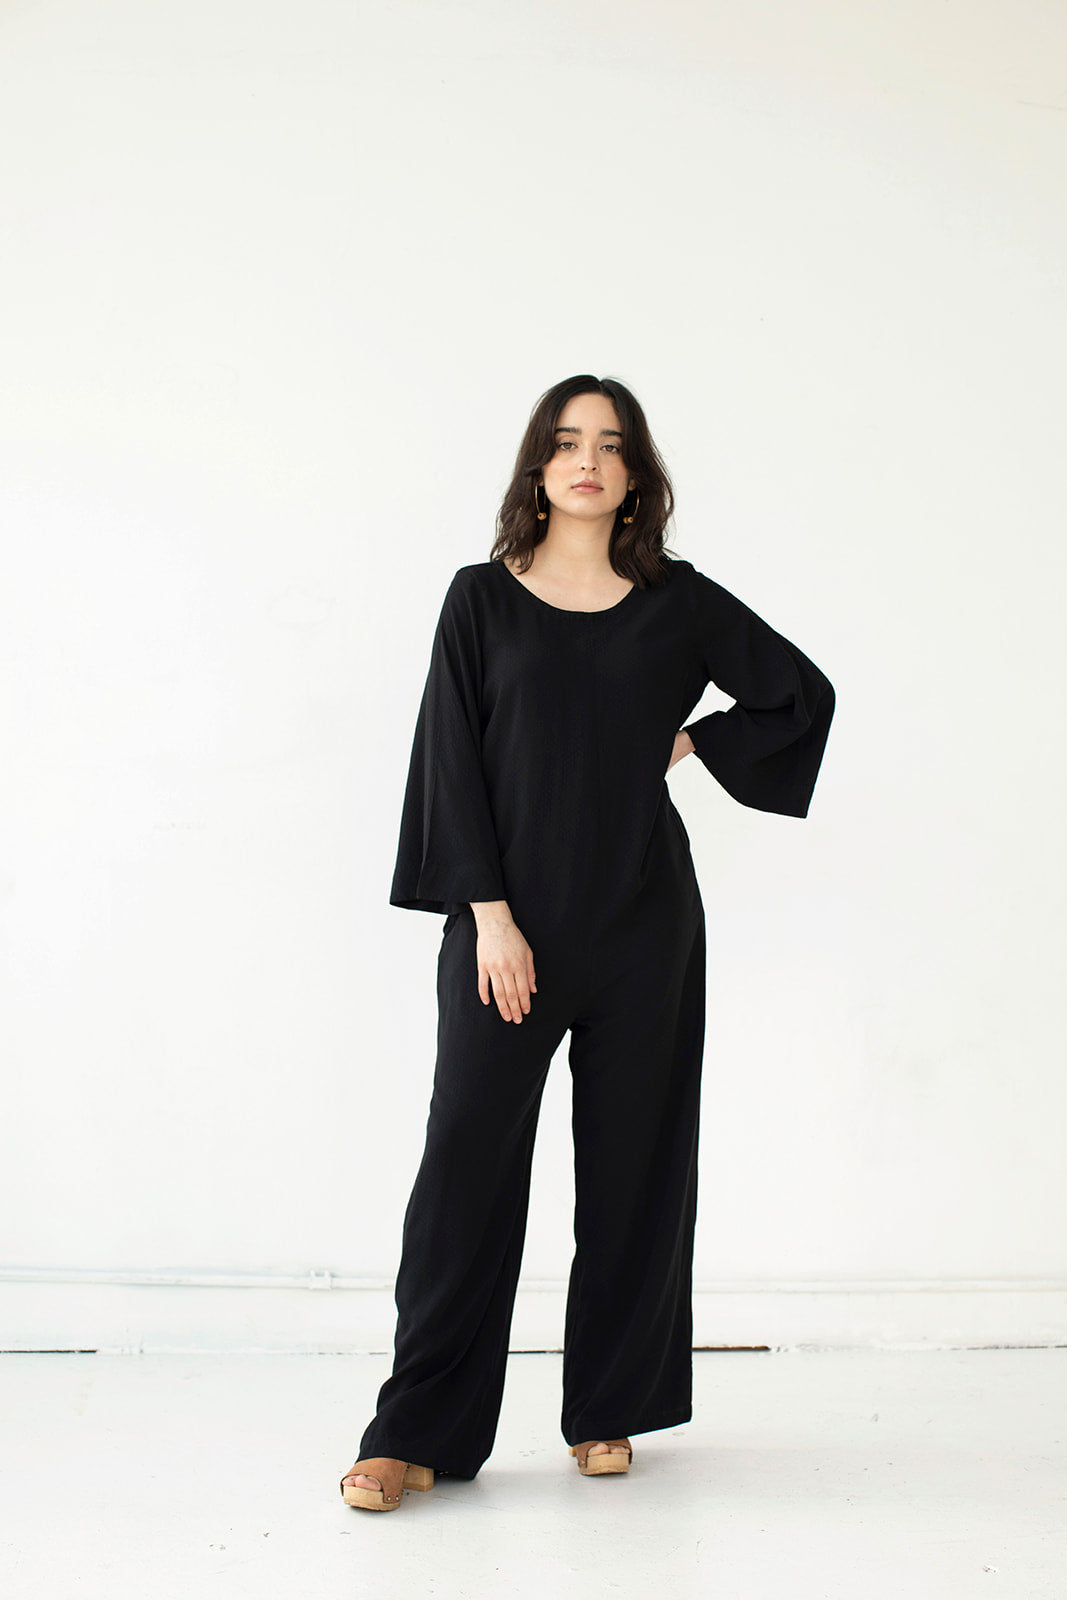 Cristina wears the black Tomoko Jumpsuit part of the Hanae Collection by The Cura Co